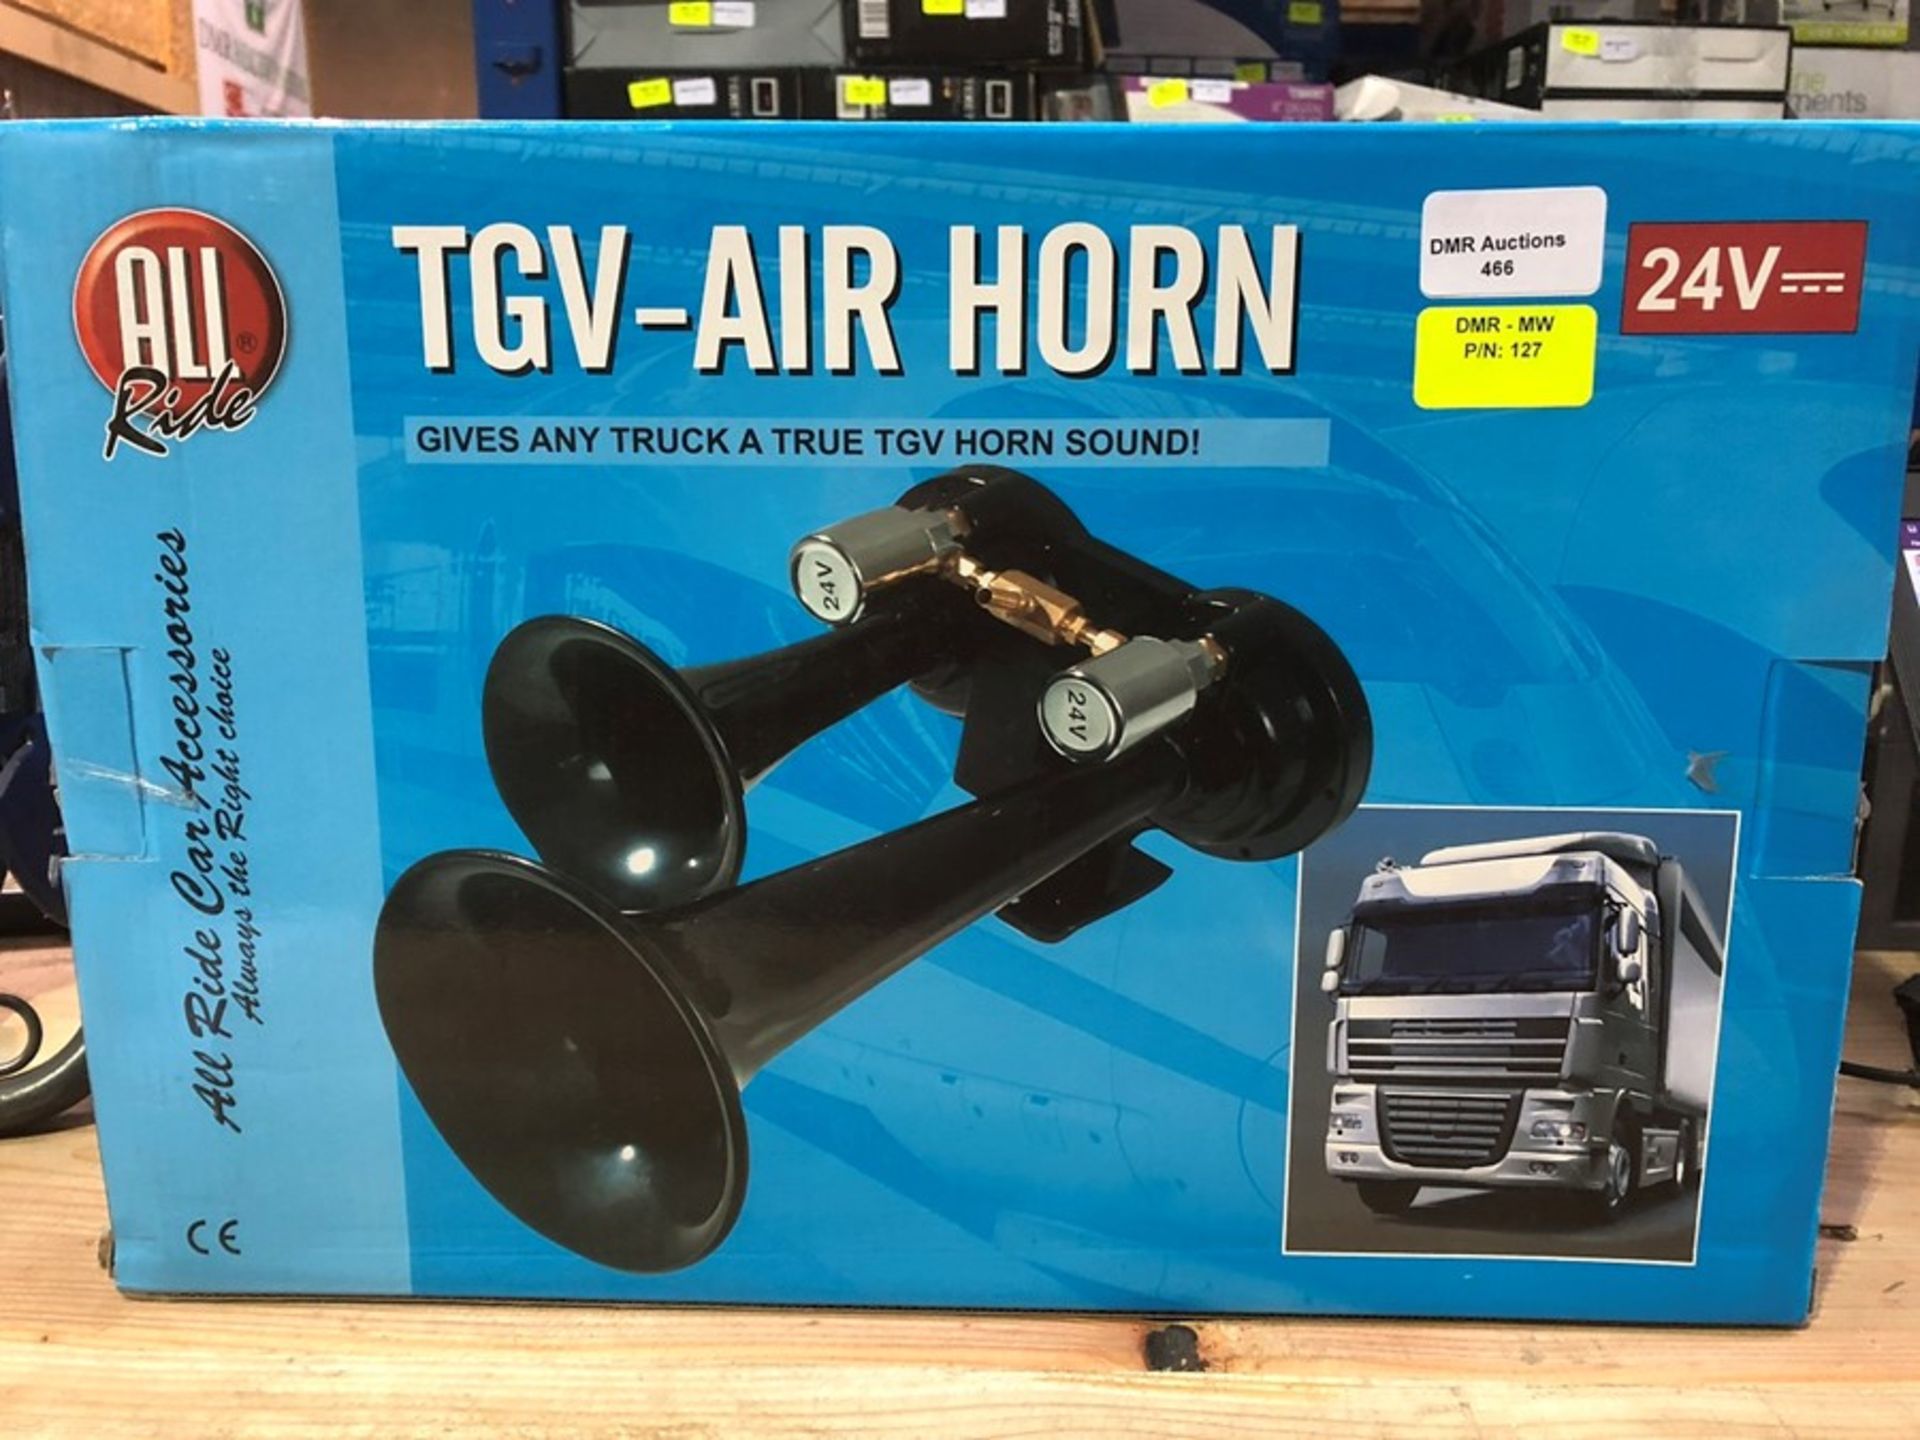 1 BOXED ALL RIDE TGV AIR HORN / RRP £49.99 (PUBLIC VIEWING AVAILABLE)